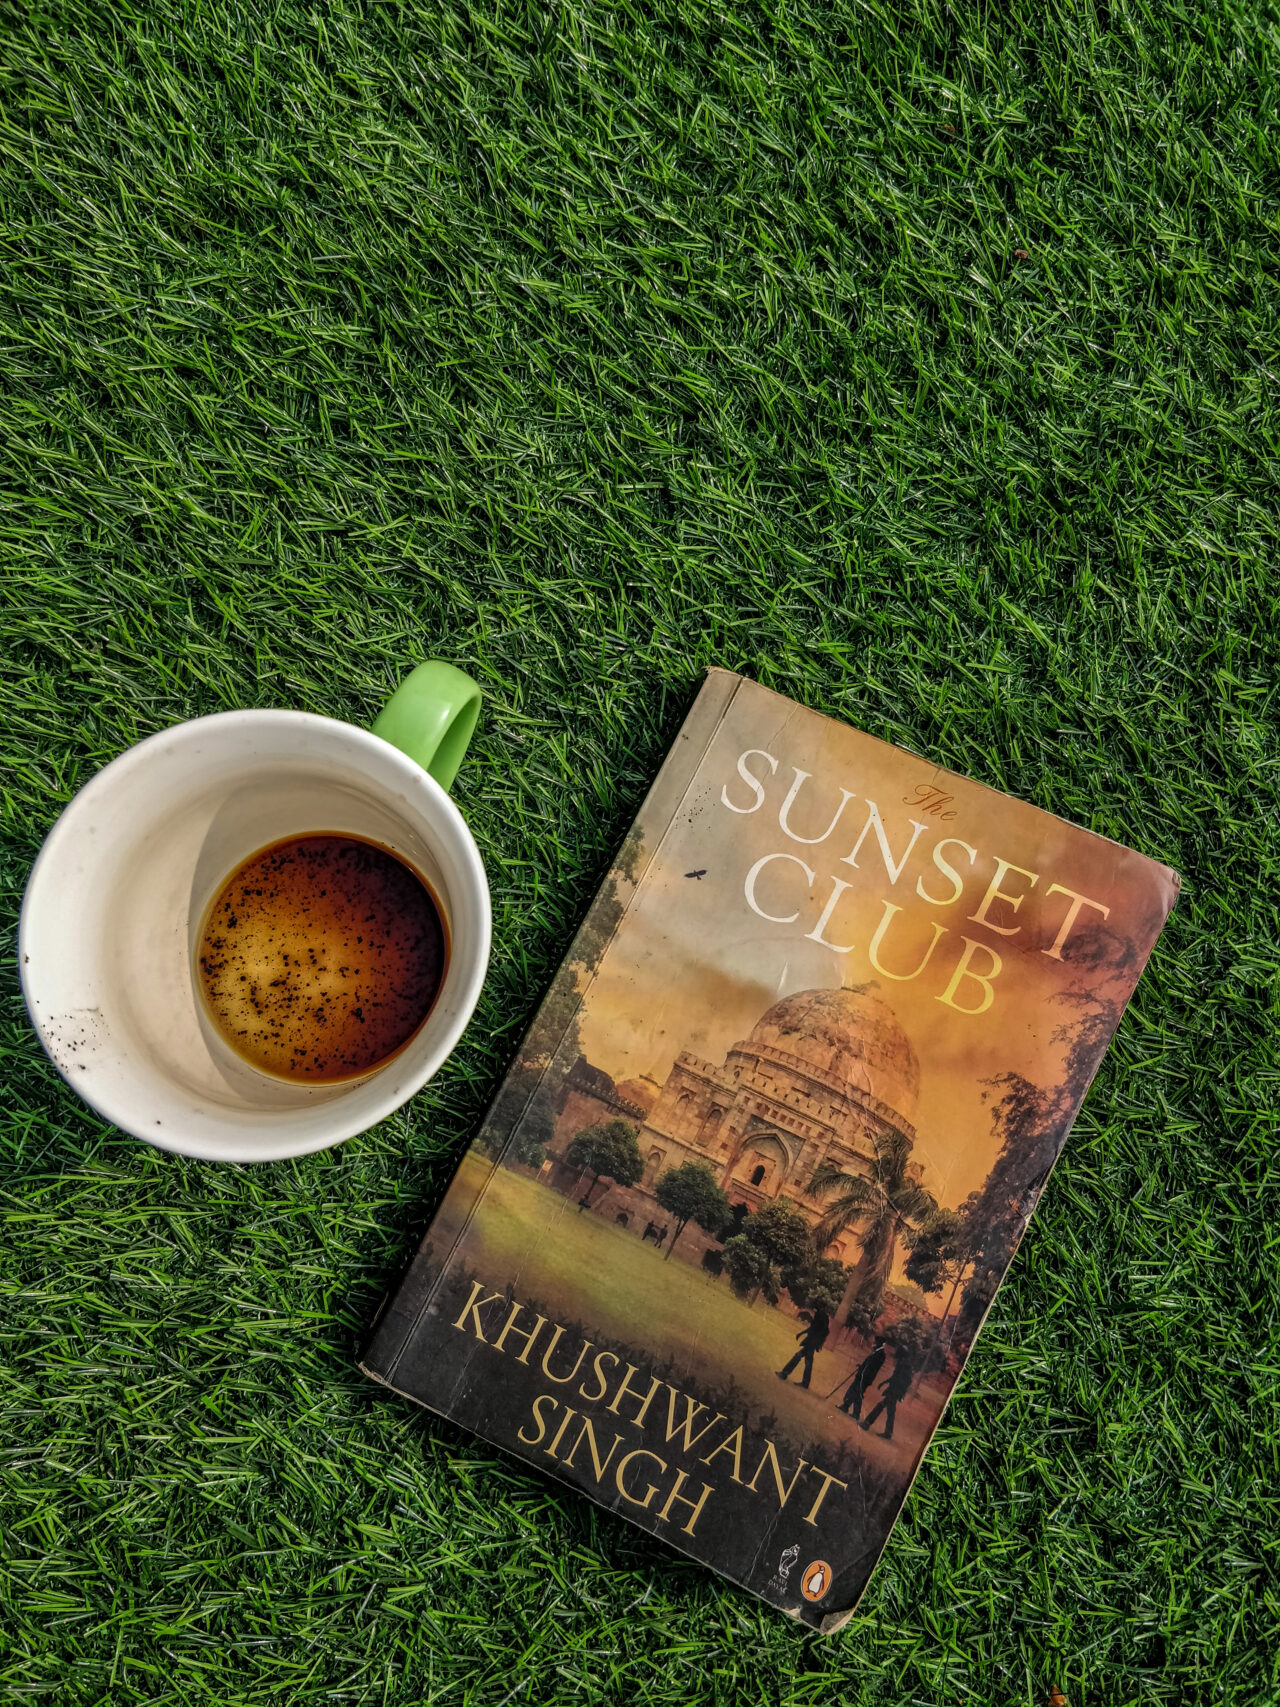 The sunset club by Khushwant Singh